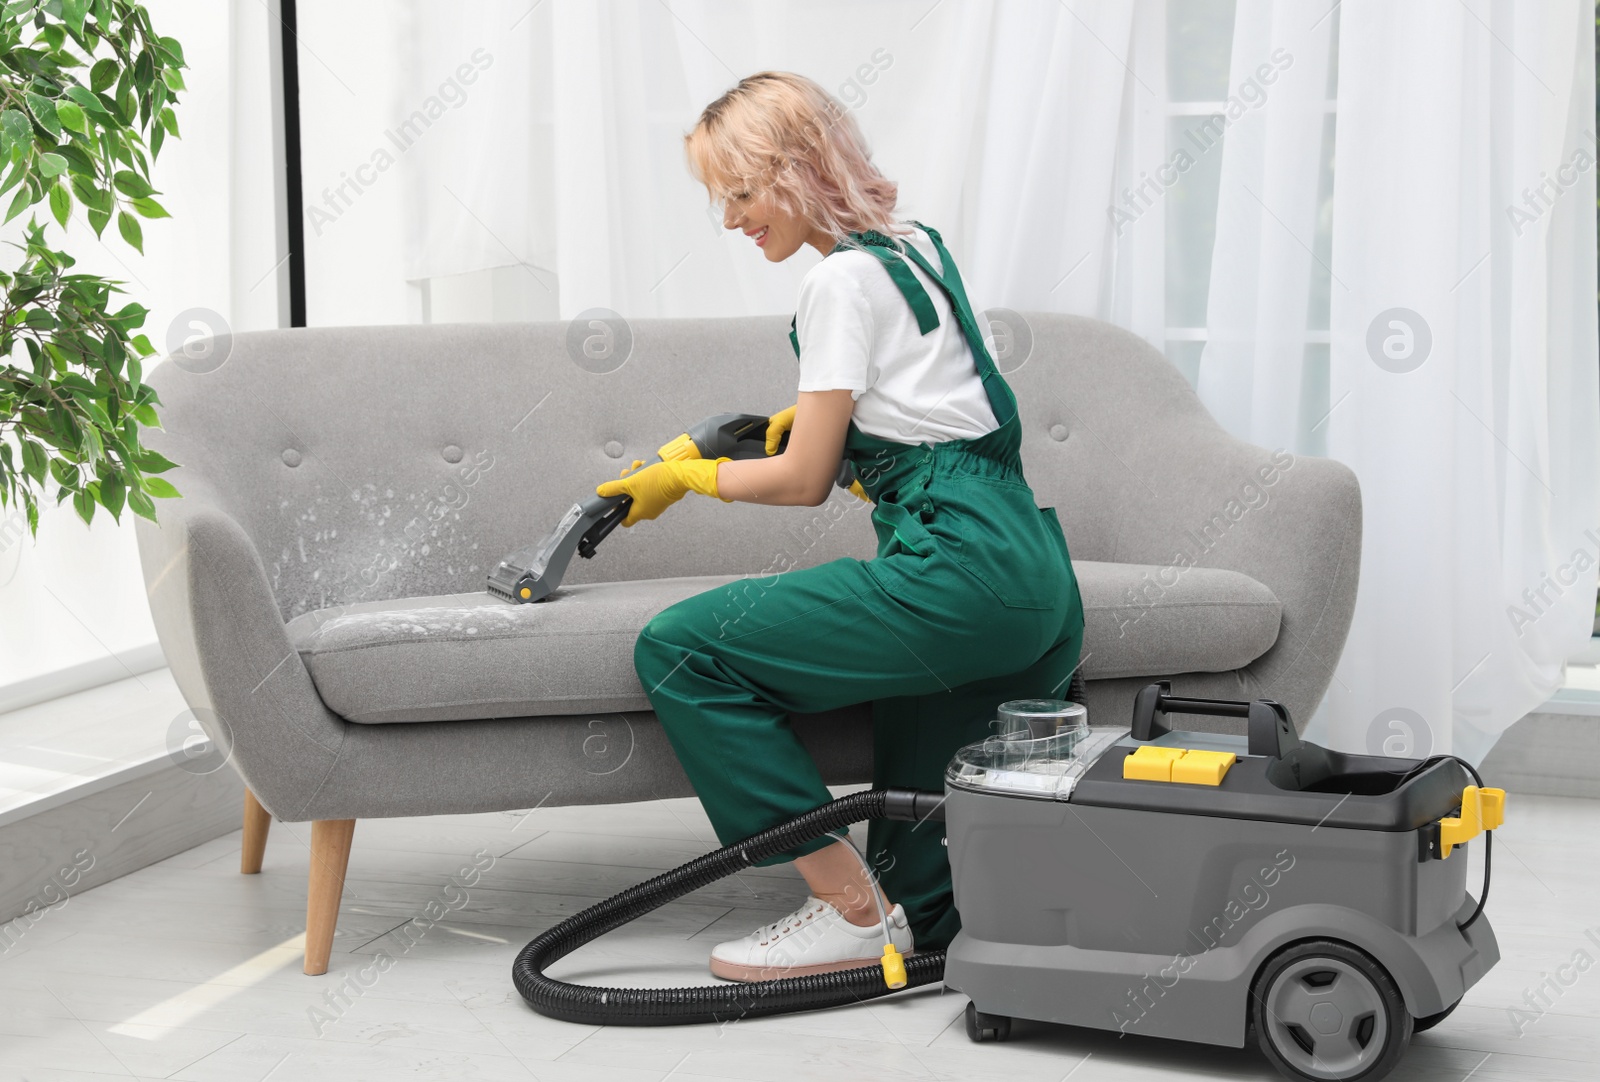 Photo of Female janitor removing dirt from sofa with upholstery cleaner in room